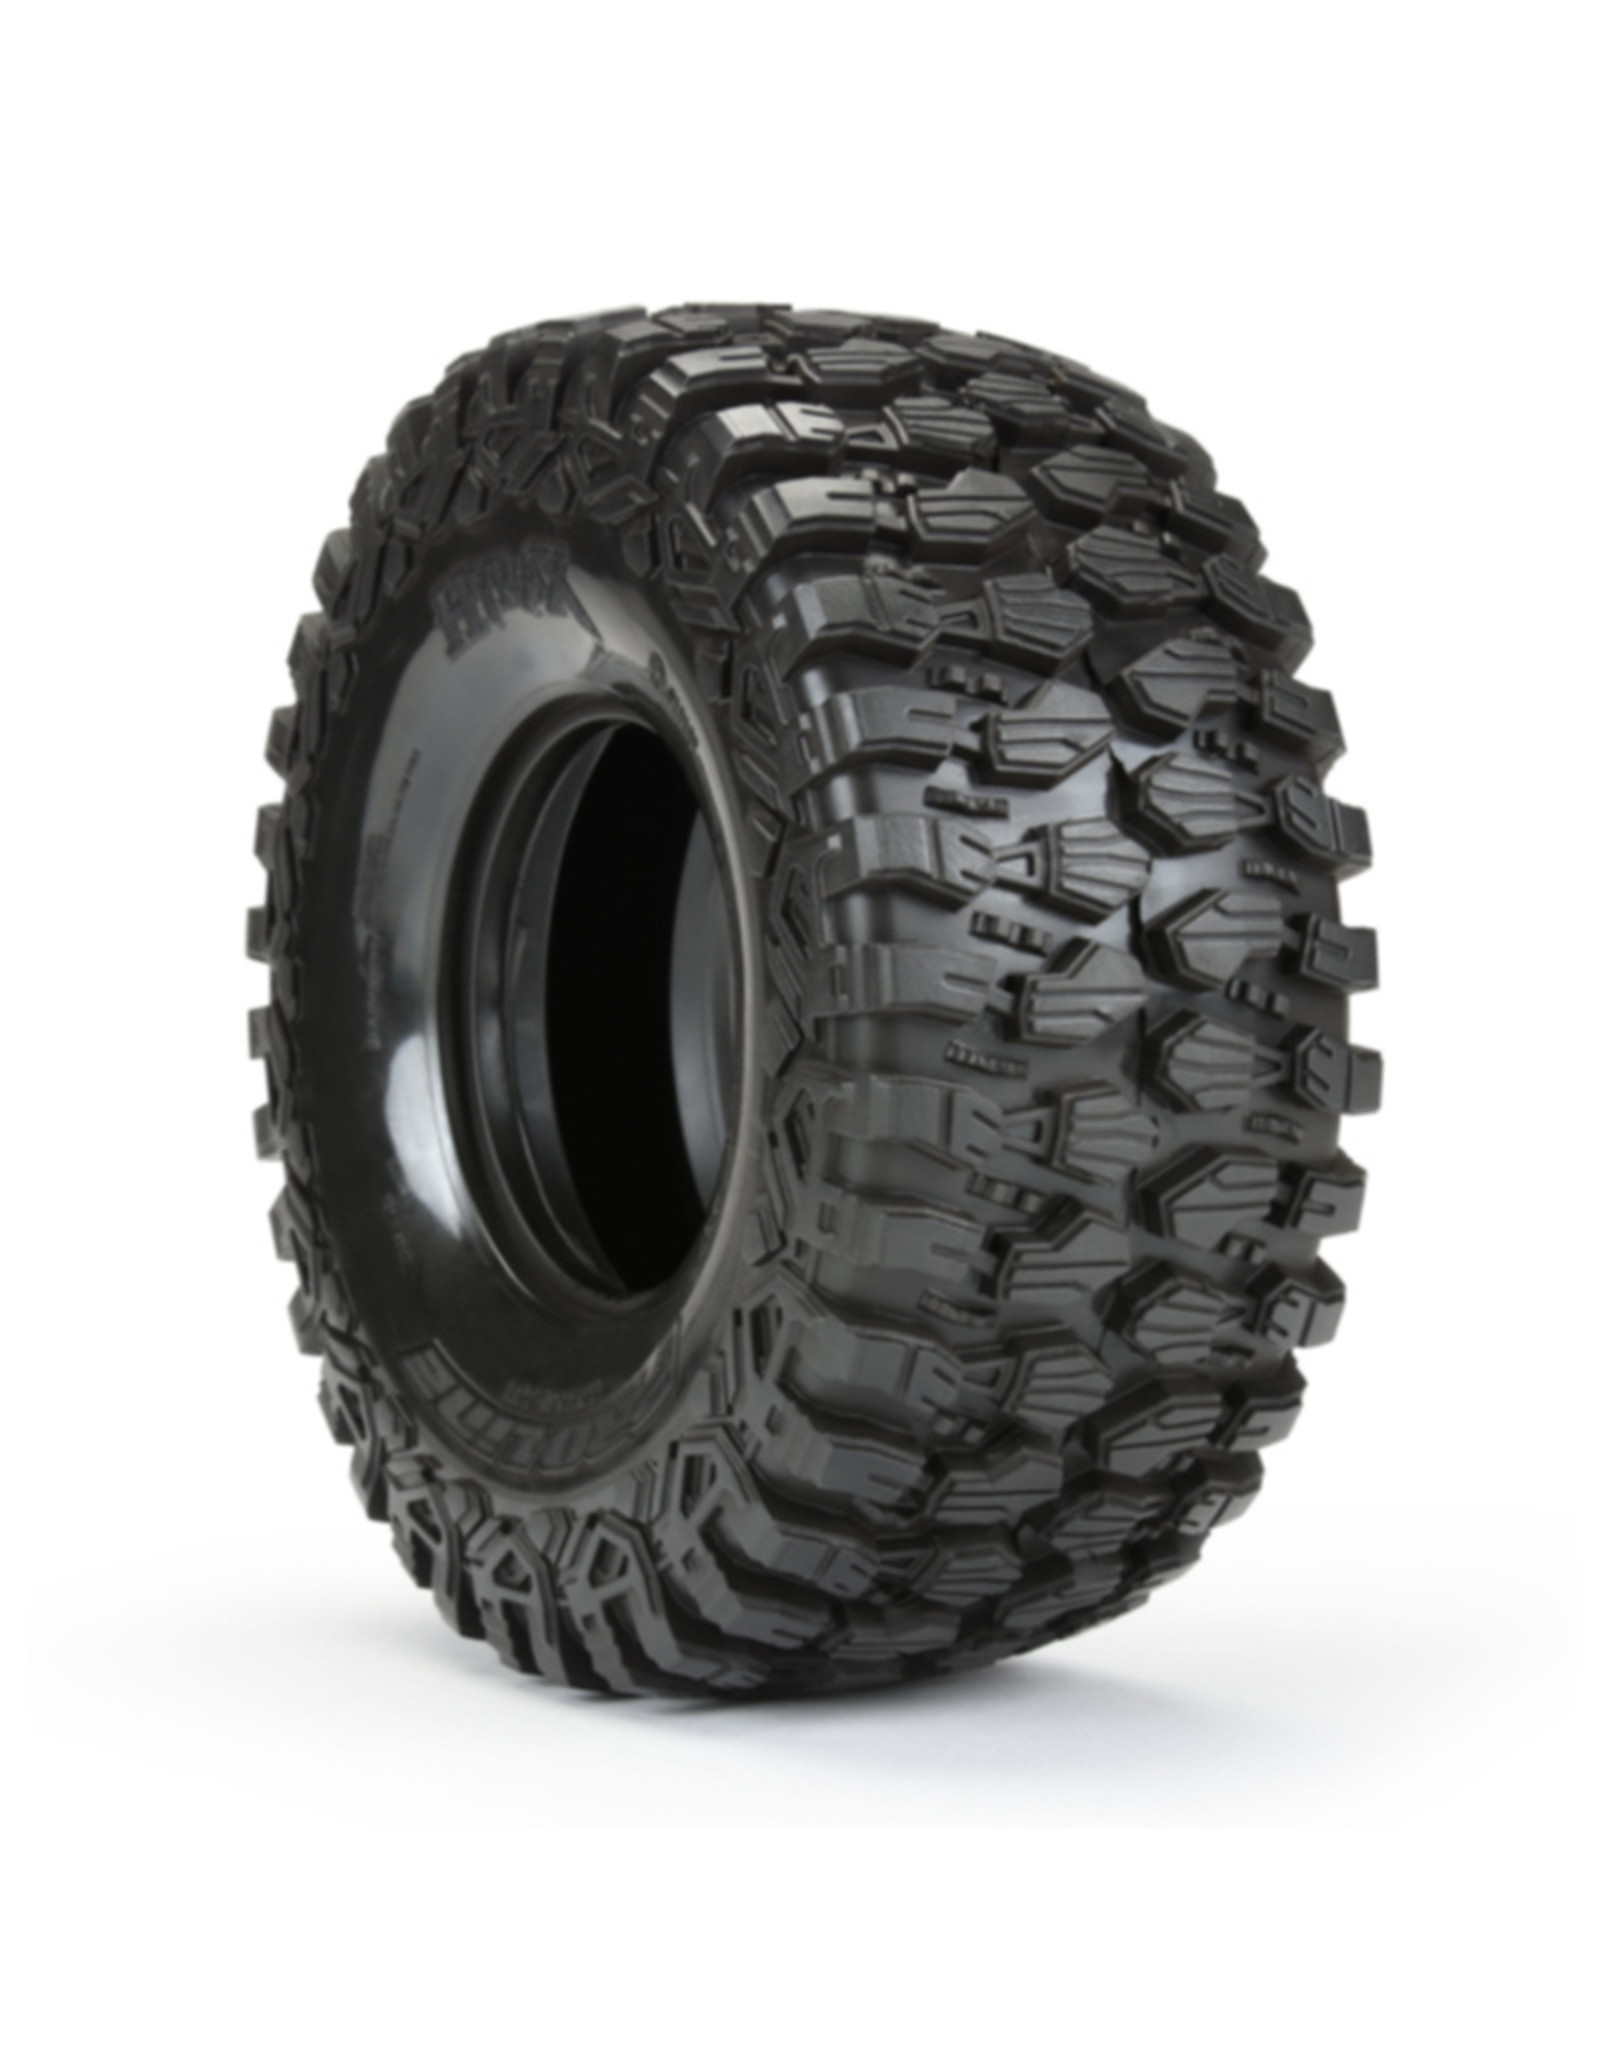 Pro-Line Racing PRO1016300 Hyrax Tires for Unlimited Desert Racer F/R